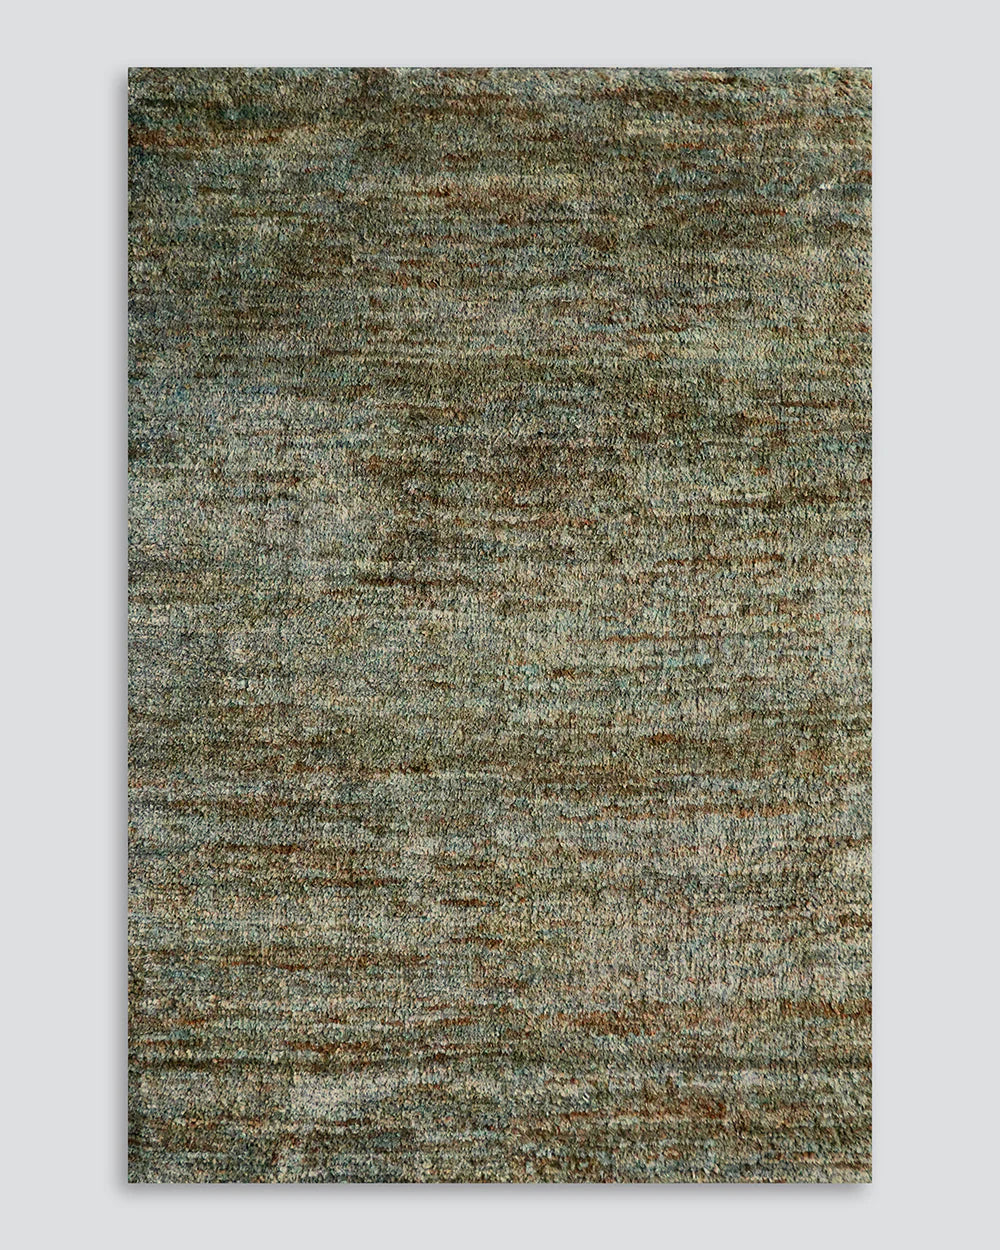 Pampas Spring Green Rug from Baya Furtex Stockist Make Your House A Home, Furniture Store Bendigo. Free Australia Wide Delivery. Mulberi Rugs.